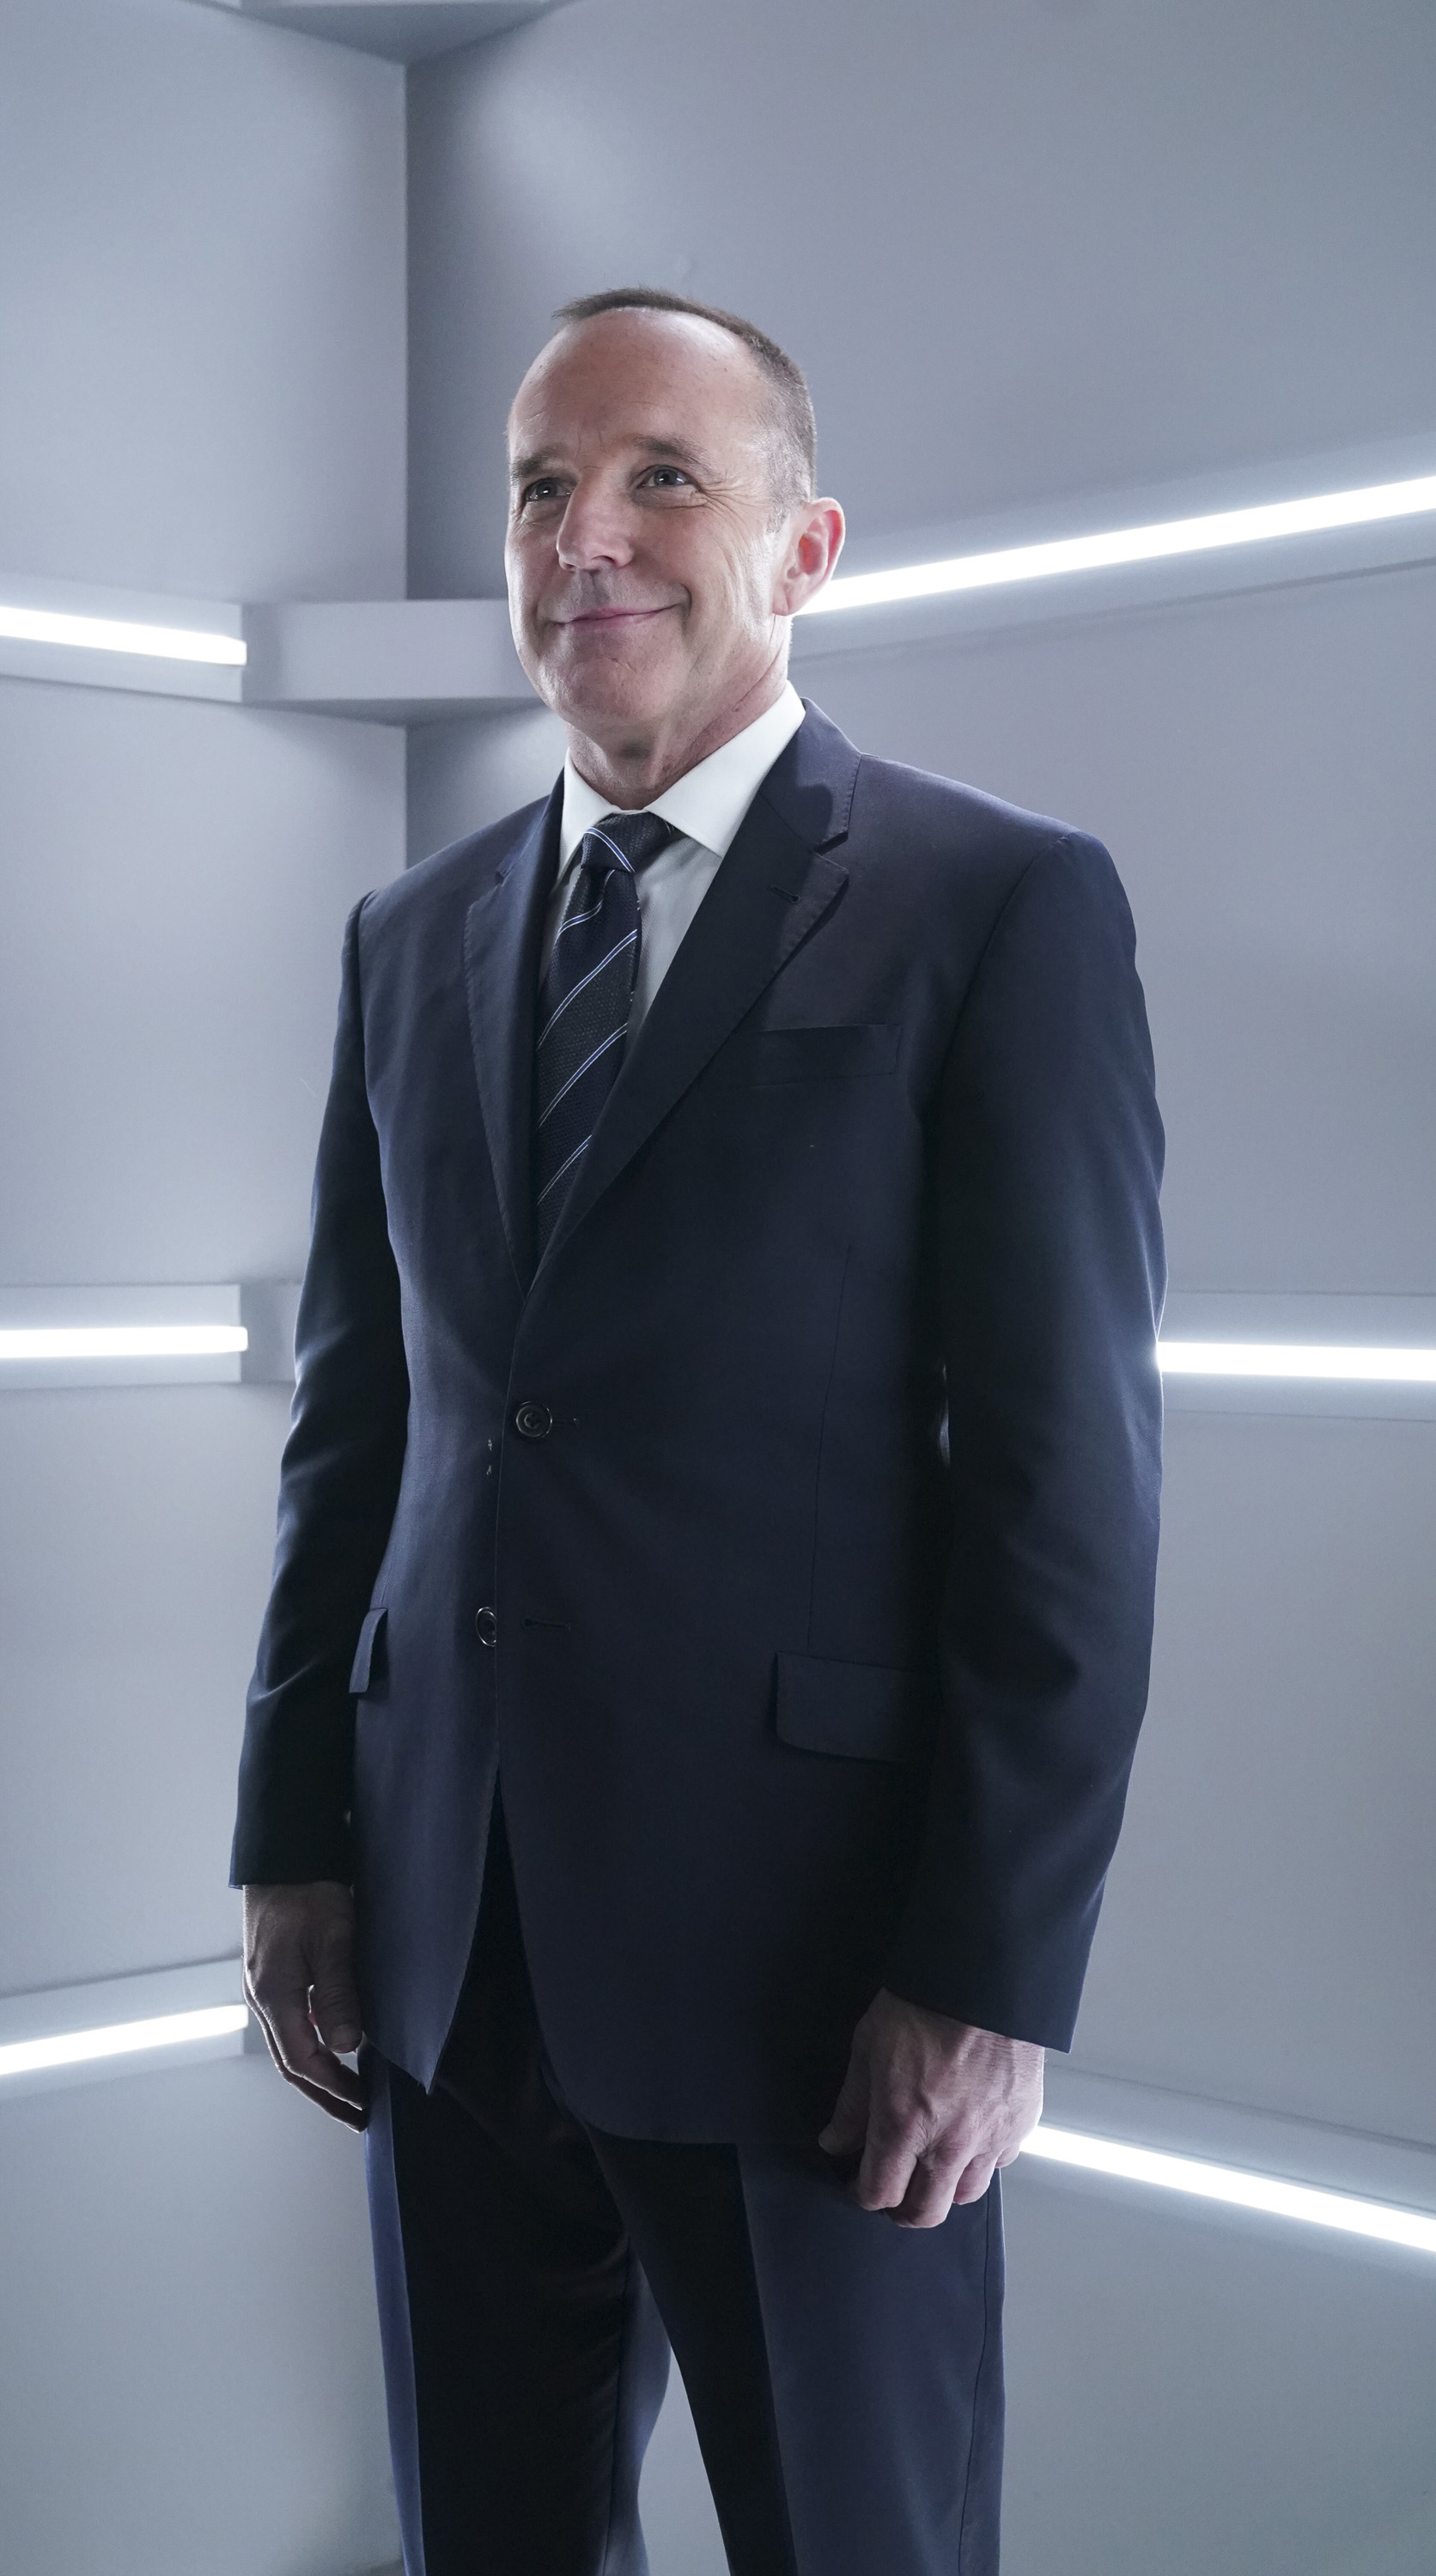 Agent Coulson Won't Appear in Avengers: Age of Ultron; Will Likely Appear  in Avengers 3